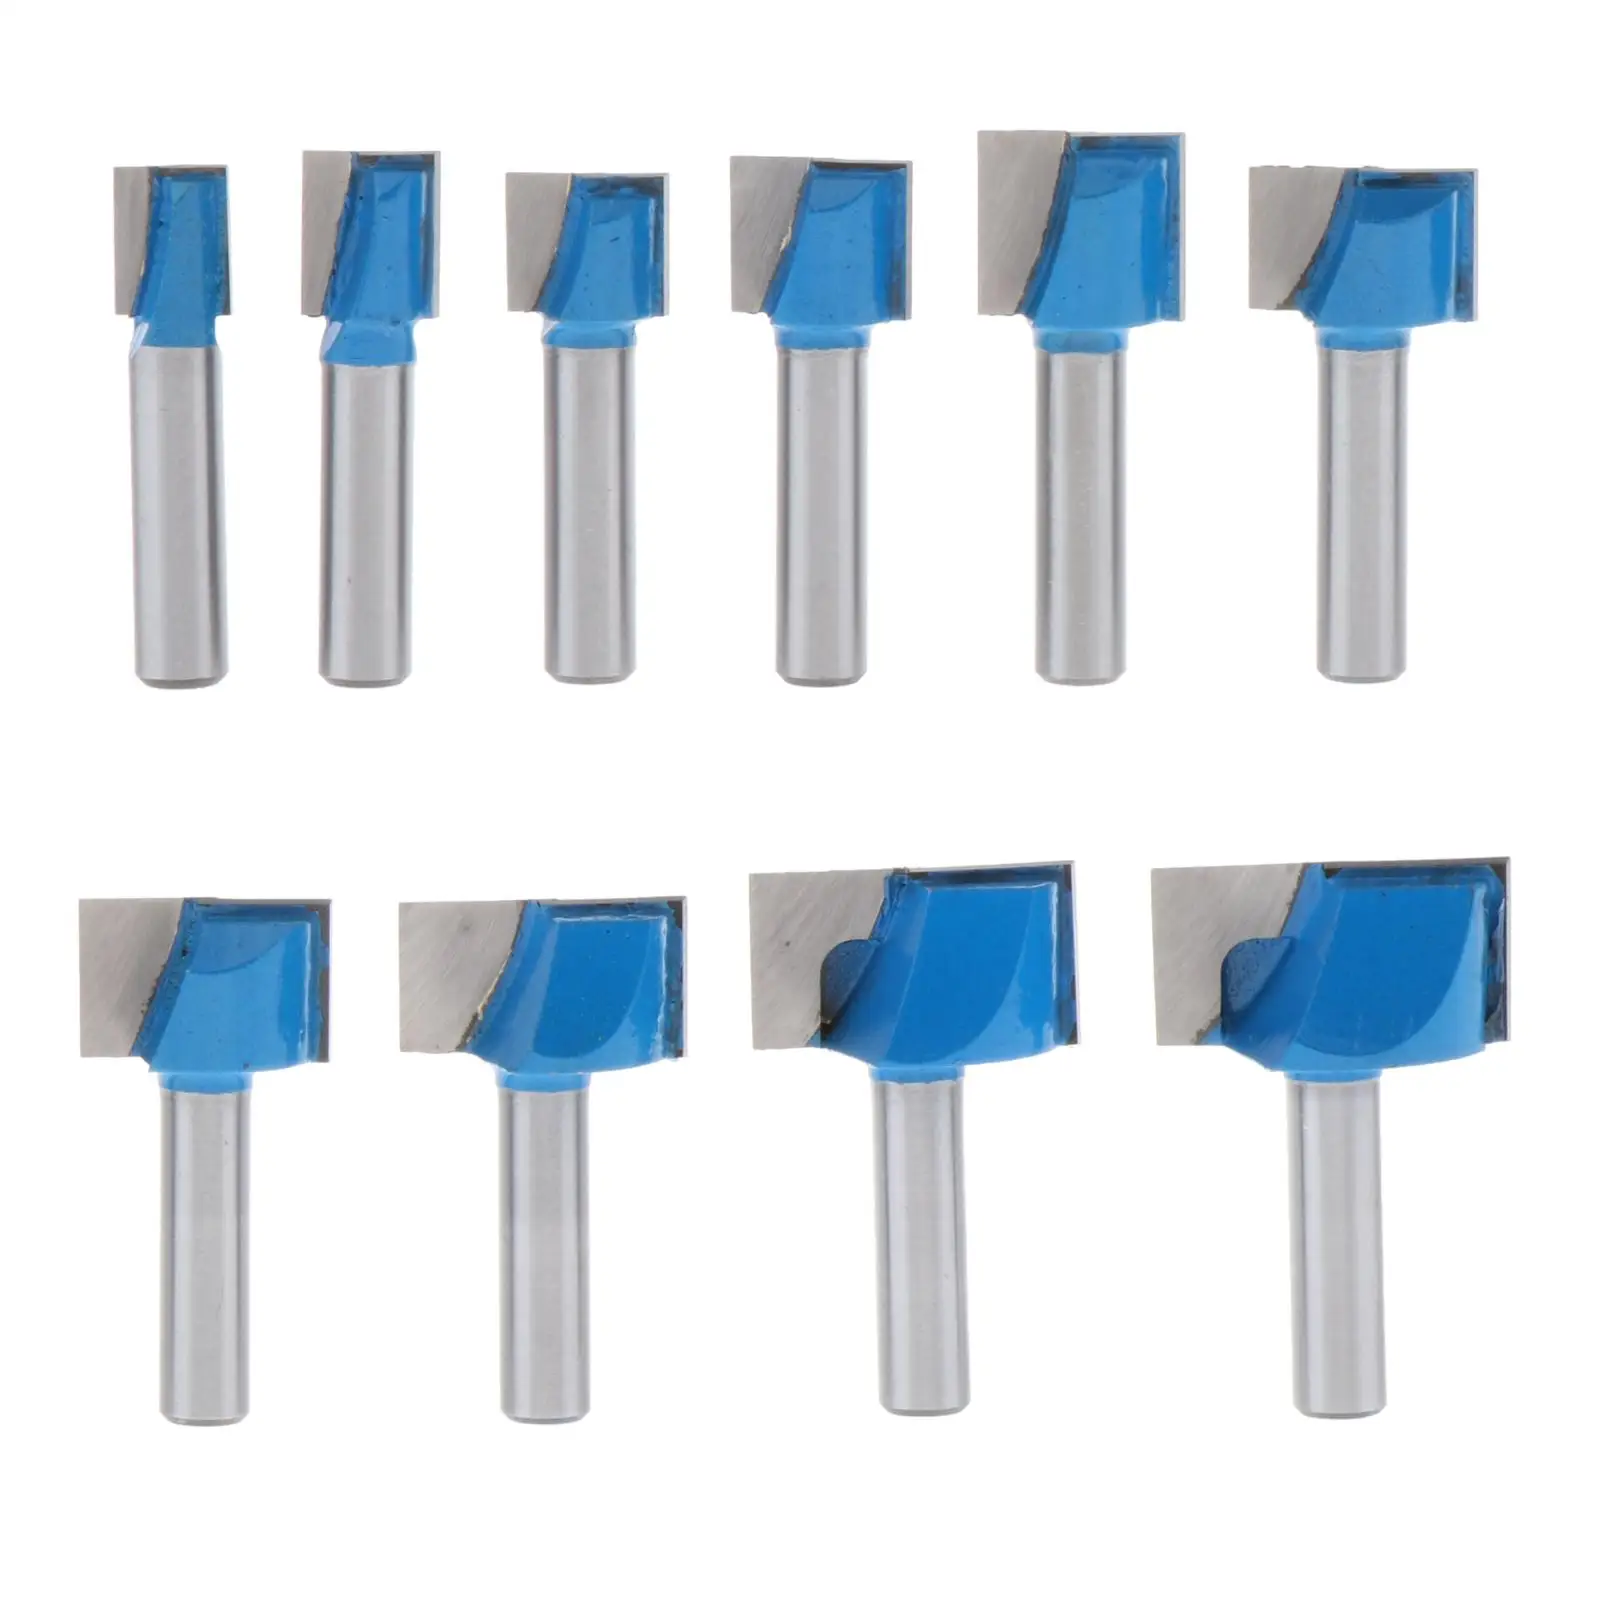 8mm Shank Bottom Cleaning Router Bit Set 10pcs Carving Woodworking Tool